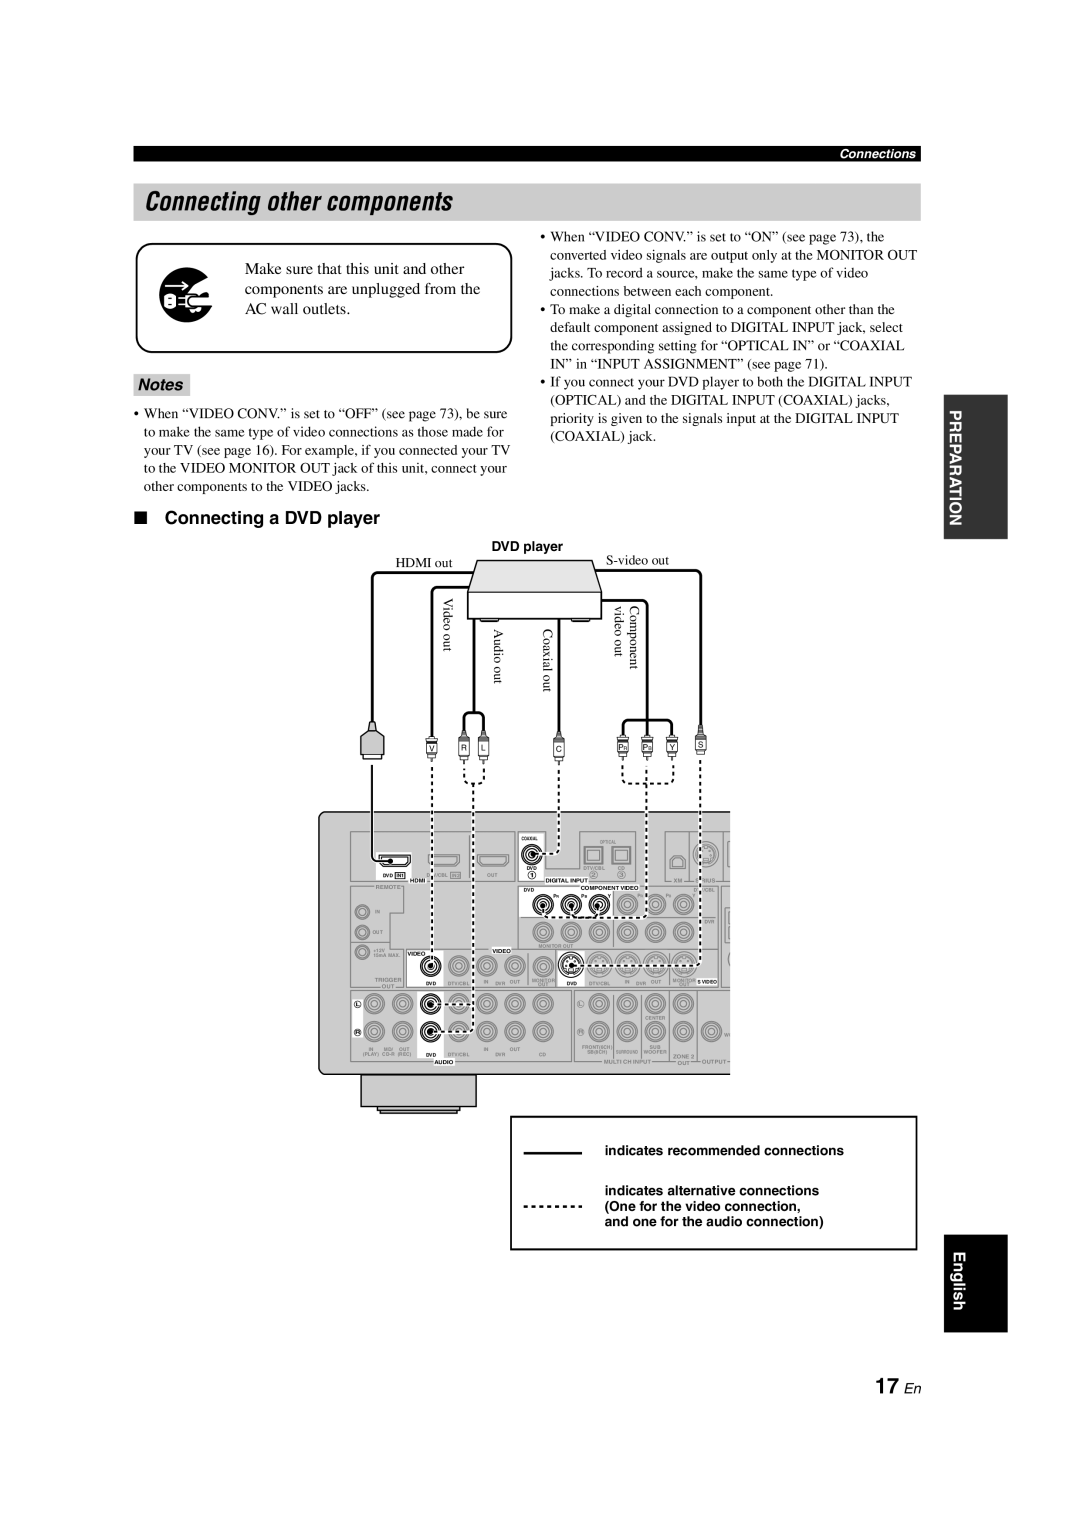 Yamaha HTR-6150 owner manual Connecting other components, 17 En, Connecting a DVD player, Notes 